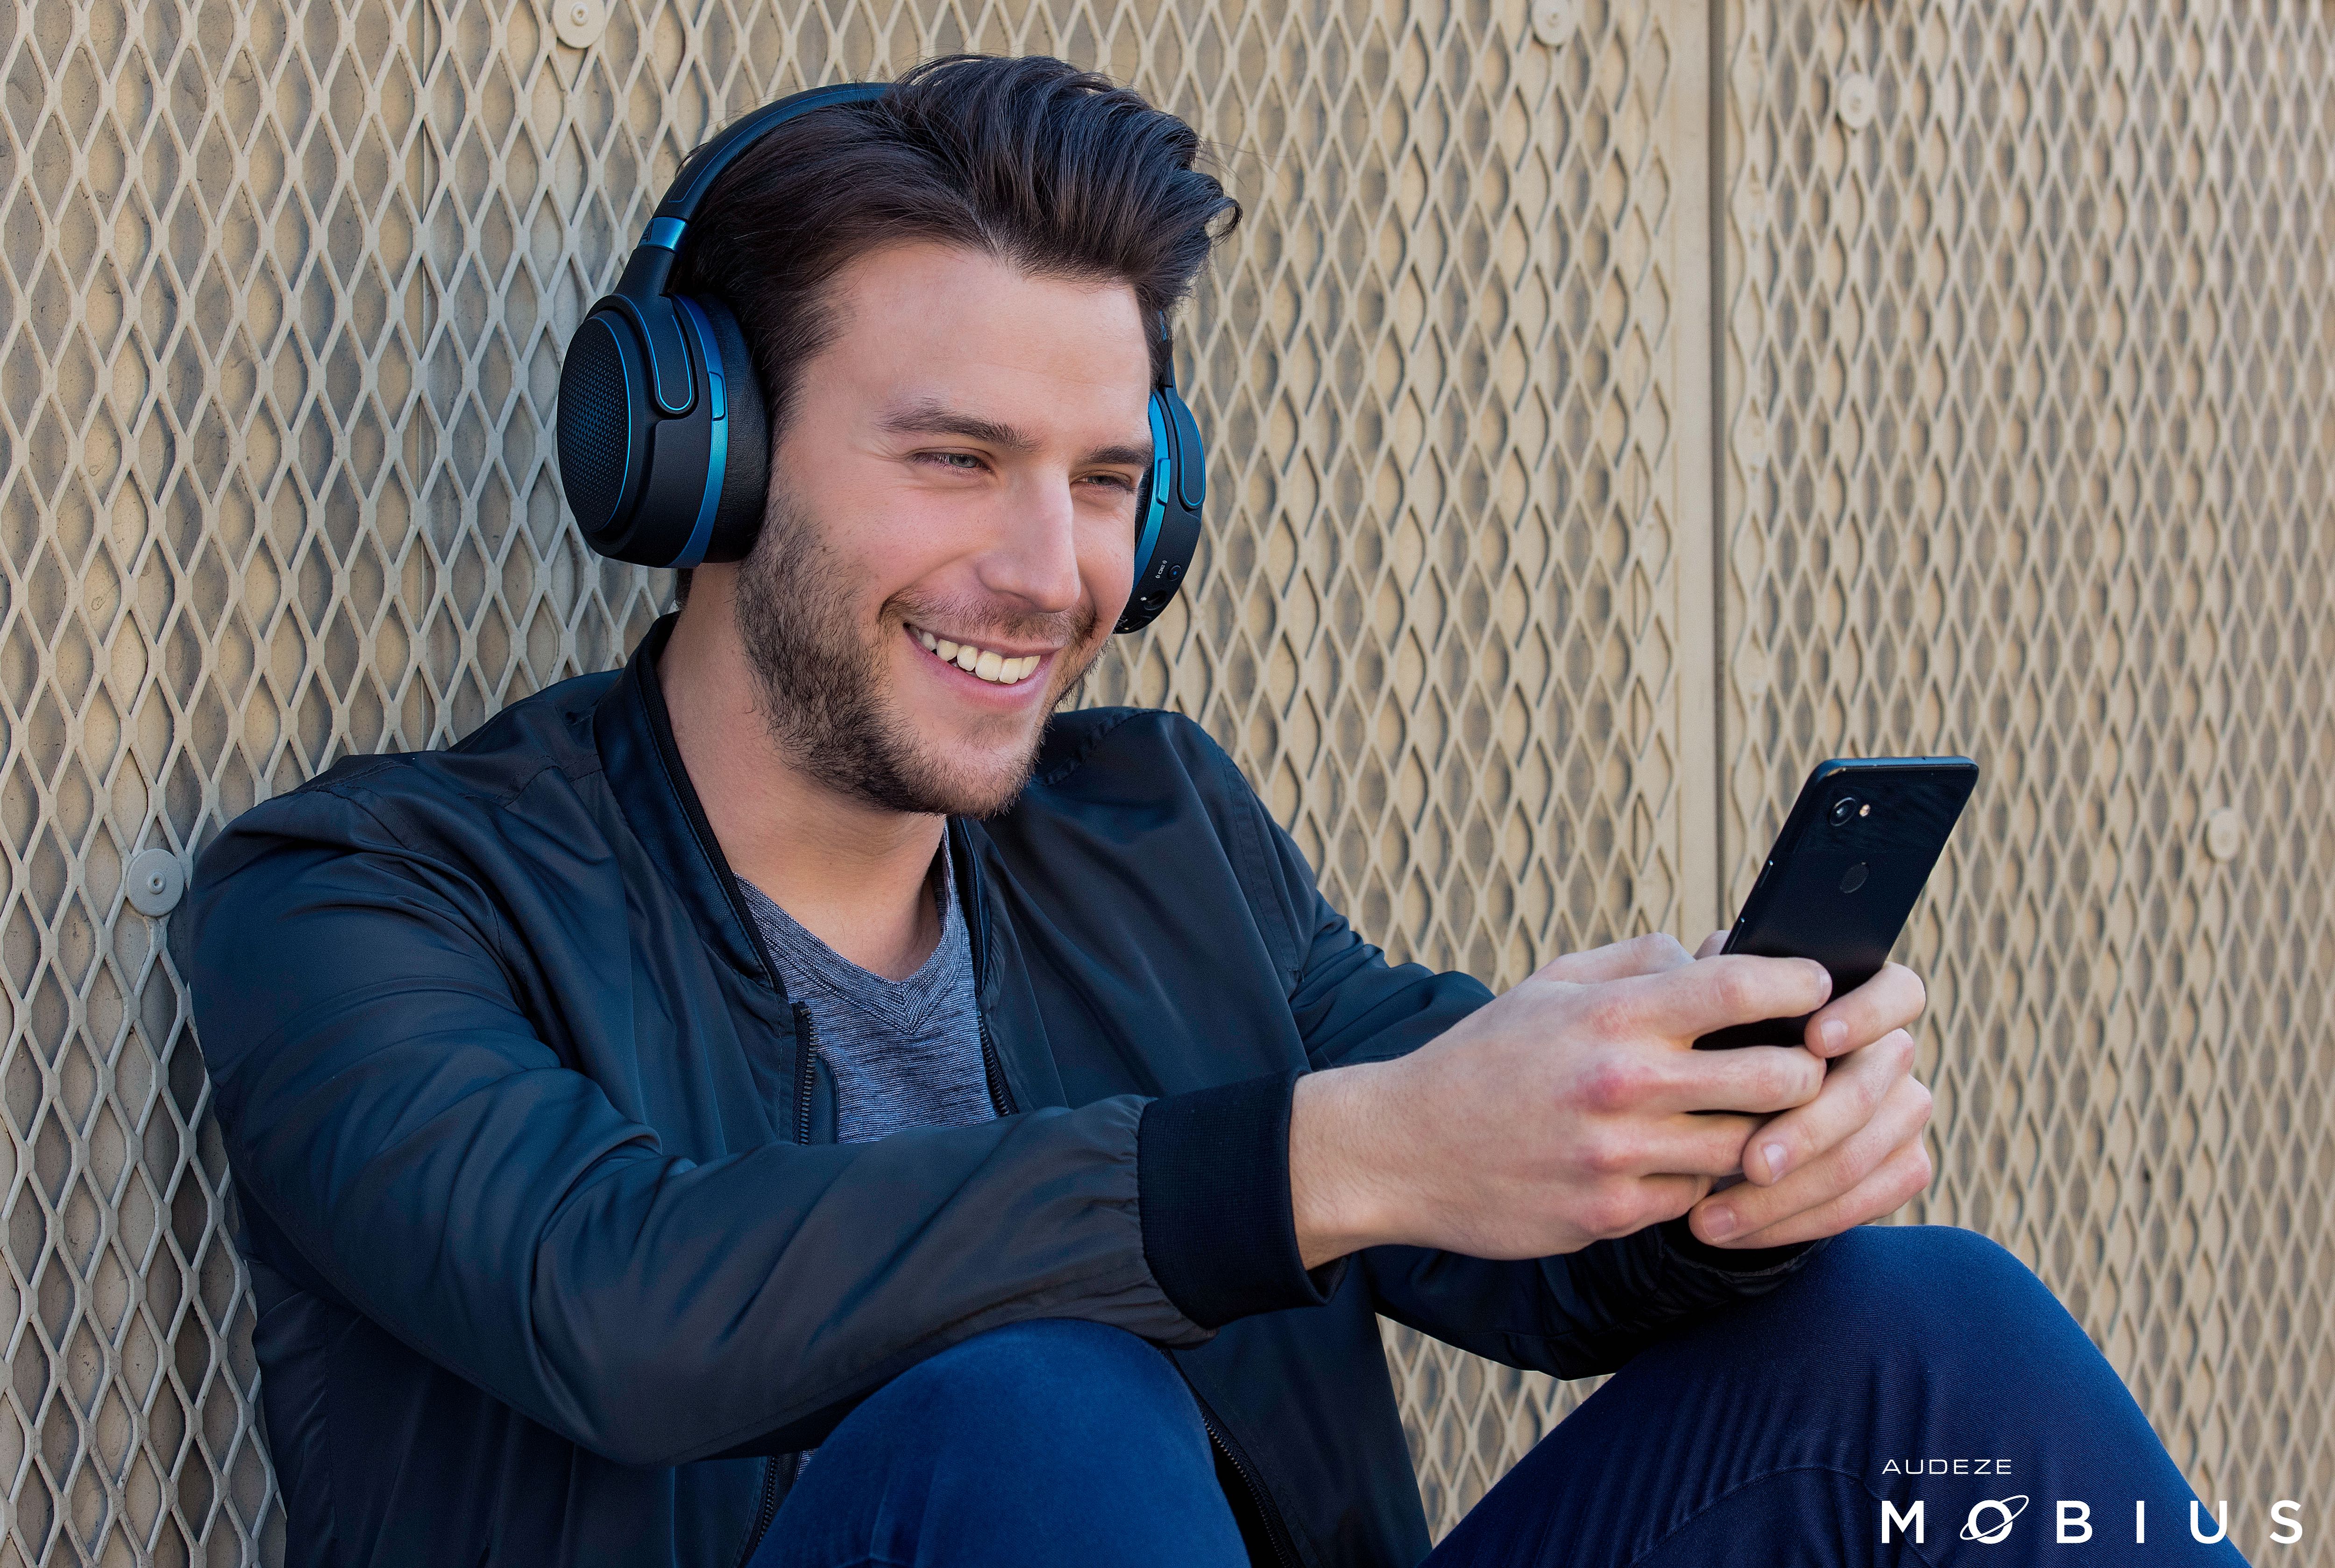 Audeze Mobius: Want to go wireless for mobile gaming?